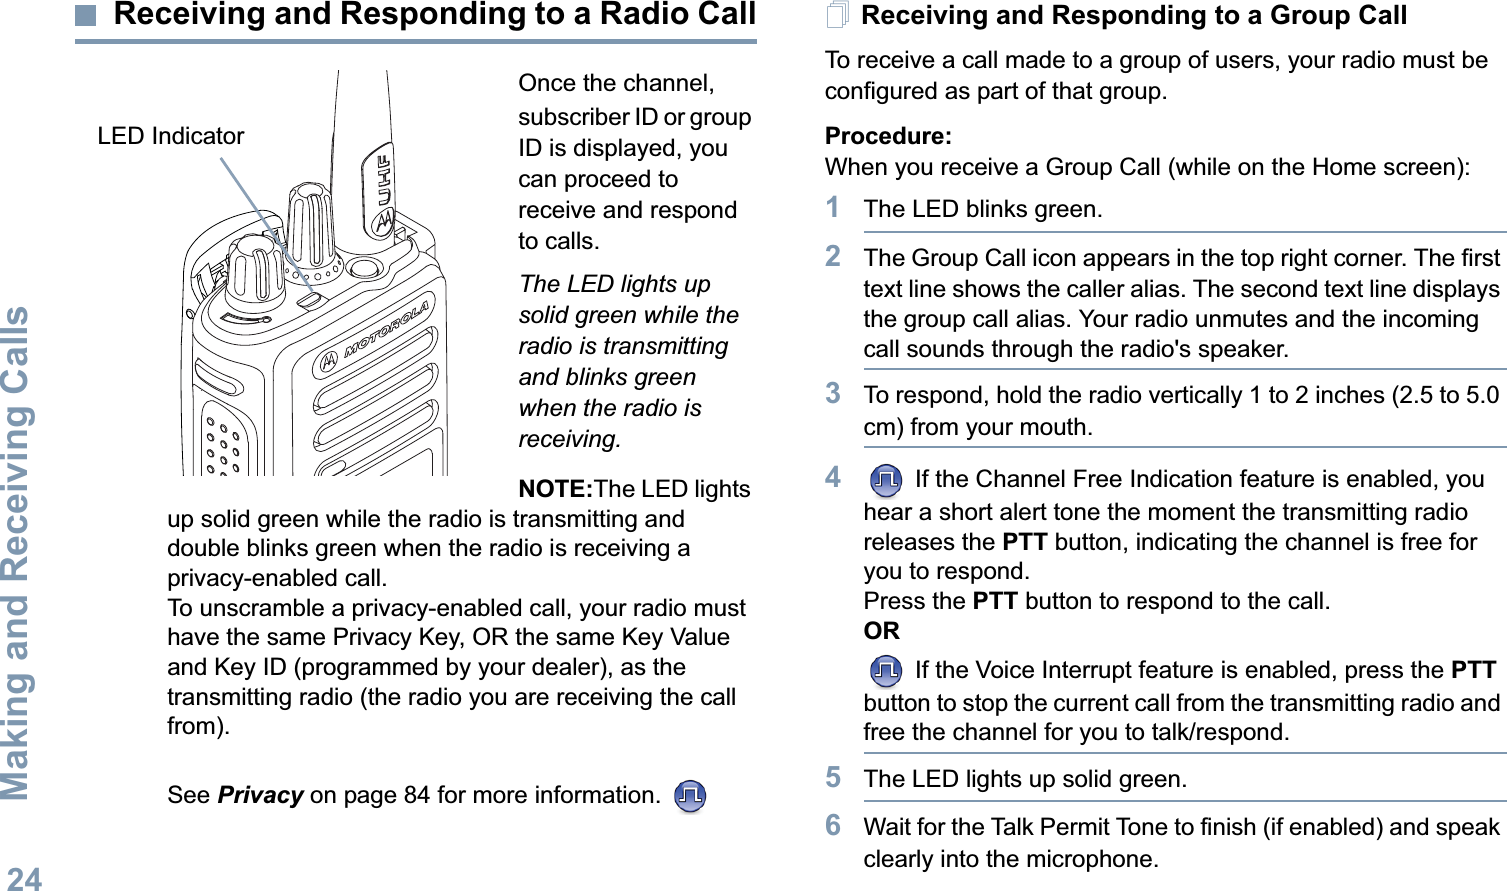 Making and Receiving CallsEnglish24Receiving and Responding to a Radio CallOnce the channel, subscriber ID or group ID is displayed, you can proceed to receive and respond to calls.The LED lights up solid green while the radio is transmitting and blinks green when the radio is receiving.NOTE:The LED lights up solid green while the radio is transmitting and double blinks green when the radio is receiving a privacy-enabled call.To unscramble a privacy-enabled call, your radio must have the same Privacy Key, OR the same Key Value and Key ID (programmed by your dealer), as the transmitting radio (the radio you are receiving the call from). See Privacy on page 84 for more information. Receiving and Responding to a Group CallTo receive a call made to a group of users, your radio must be configured as part of that group.Procedure:When you receive a Group Call (while on the Home screen):1The LED blinks green. 2The Group Call icon appears in the top right corner. The first text line shows the caller alias. The second text line displays the group call alias. Your radio unmutes and the incoming call sounds through the radio&apos;s speaker.3To respond, hold the radio vertically 1 to 2 inches (2.5 to 5.0 cm) from your mouth. 4 If the Channel Free Indication feature is enabled, you hear a short alert tone the moment the transmitting radio releases the PTT button, indicating the channel is free for you to respond.Press the PTT button to respond to the call.OR If the Voice Interrupt feature is enabled, press the PTT button to stop the current call from the transmitting radio and free the channel for you to talk/respond.5The LED lights up solid green.6Wait for the Talk Permit Tone to finish (if enabled) and speak clearly into the microphone.LED Indicator